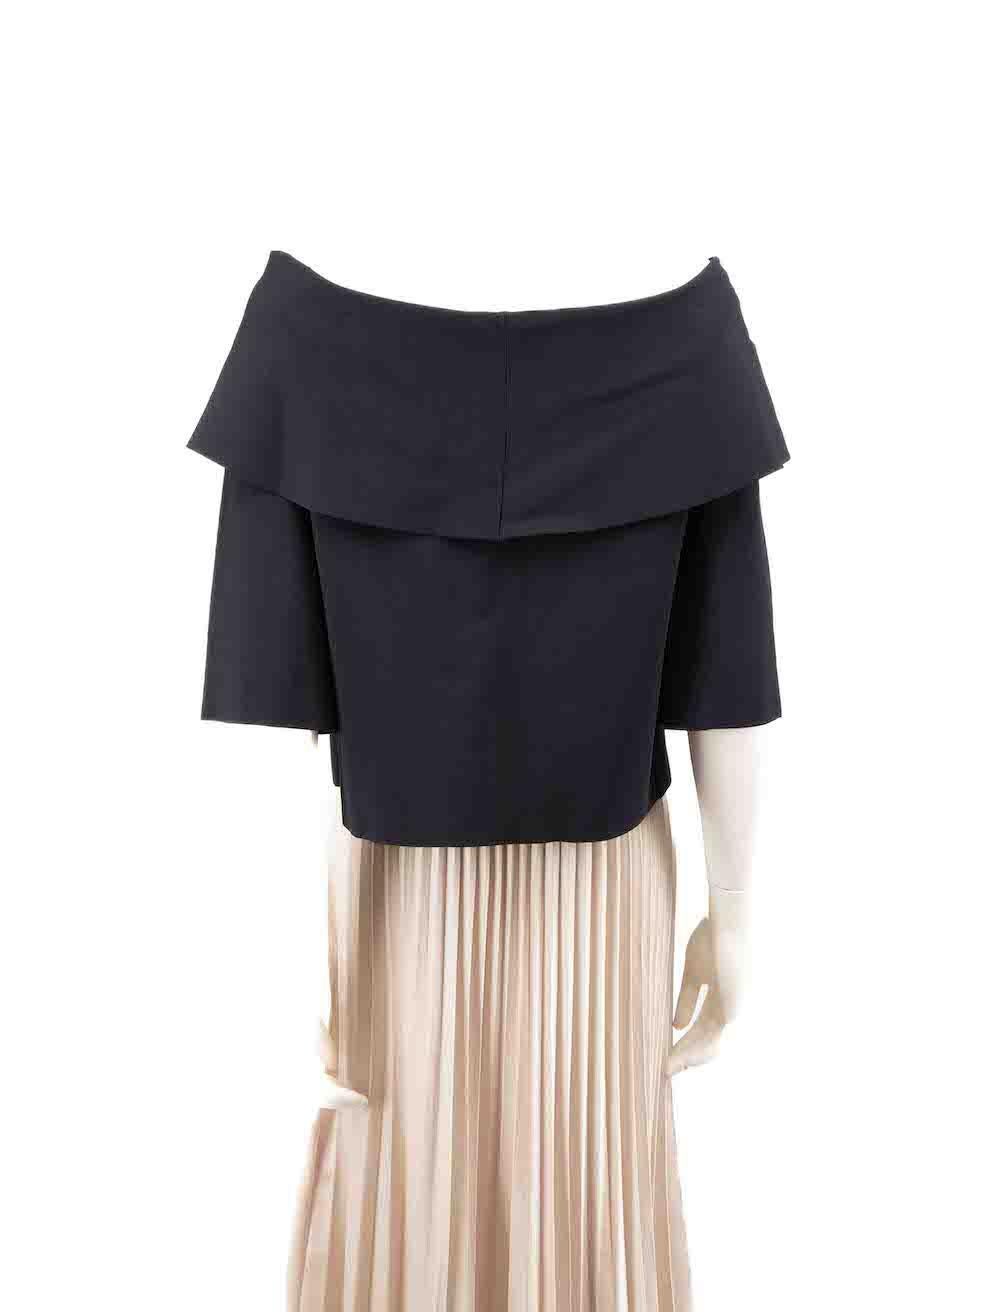 Stella McCartney Navy Wide Shoulder Top Size S In Good Condition For Sale In London, GB